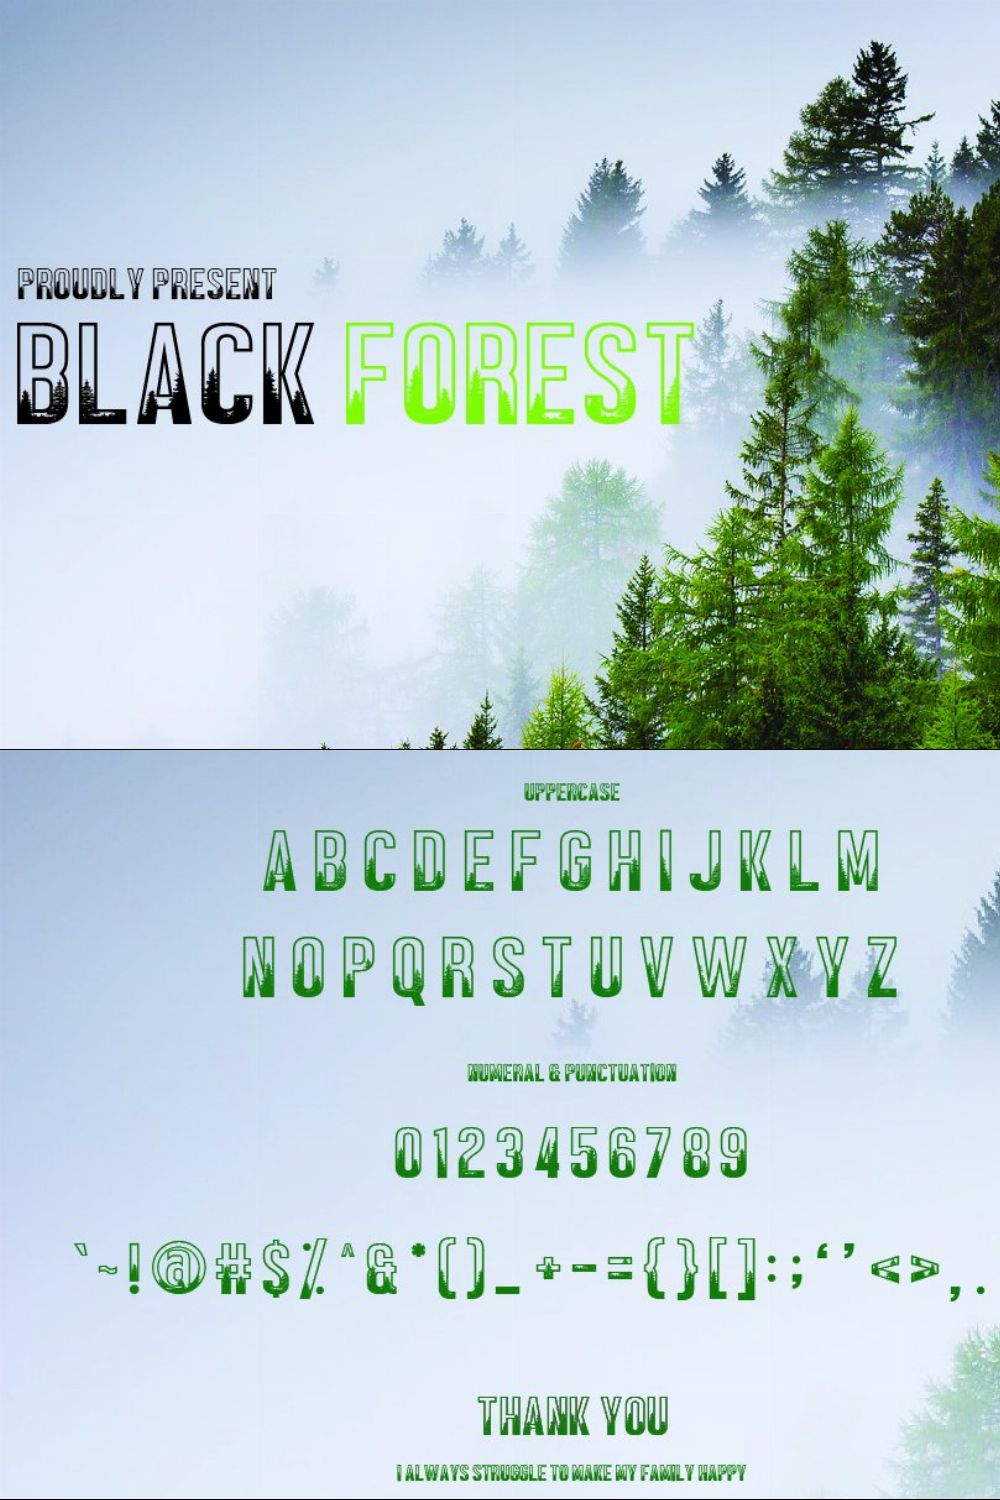 BLACK FOREST pinterest preview image.